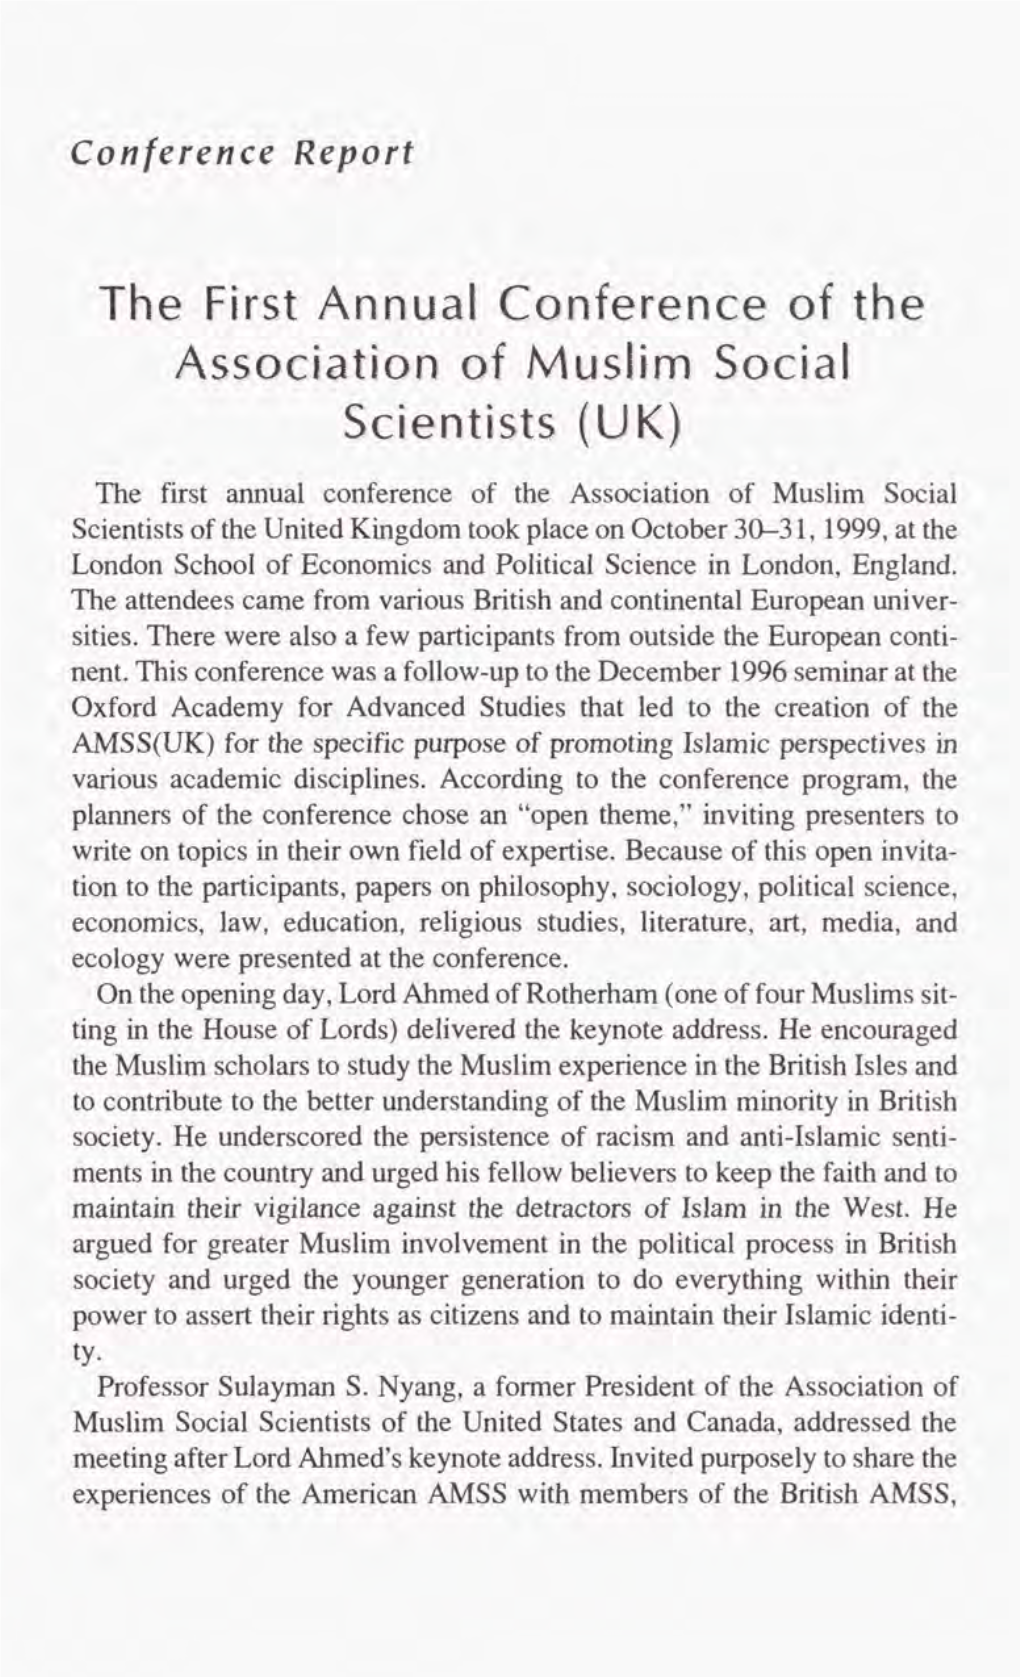 The First Annual Conference of the Association of Muslim Social Scientists (UK)